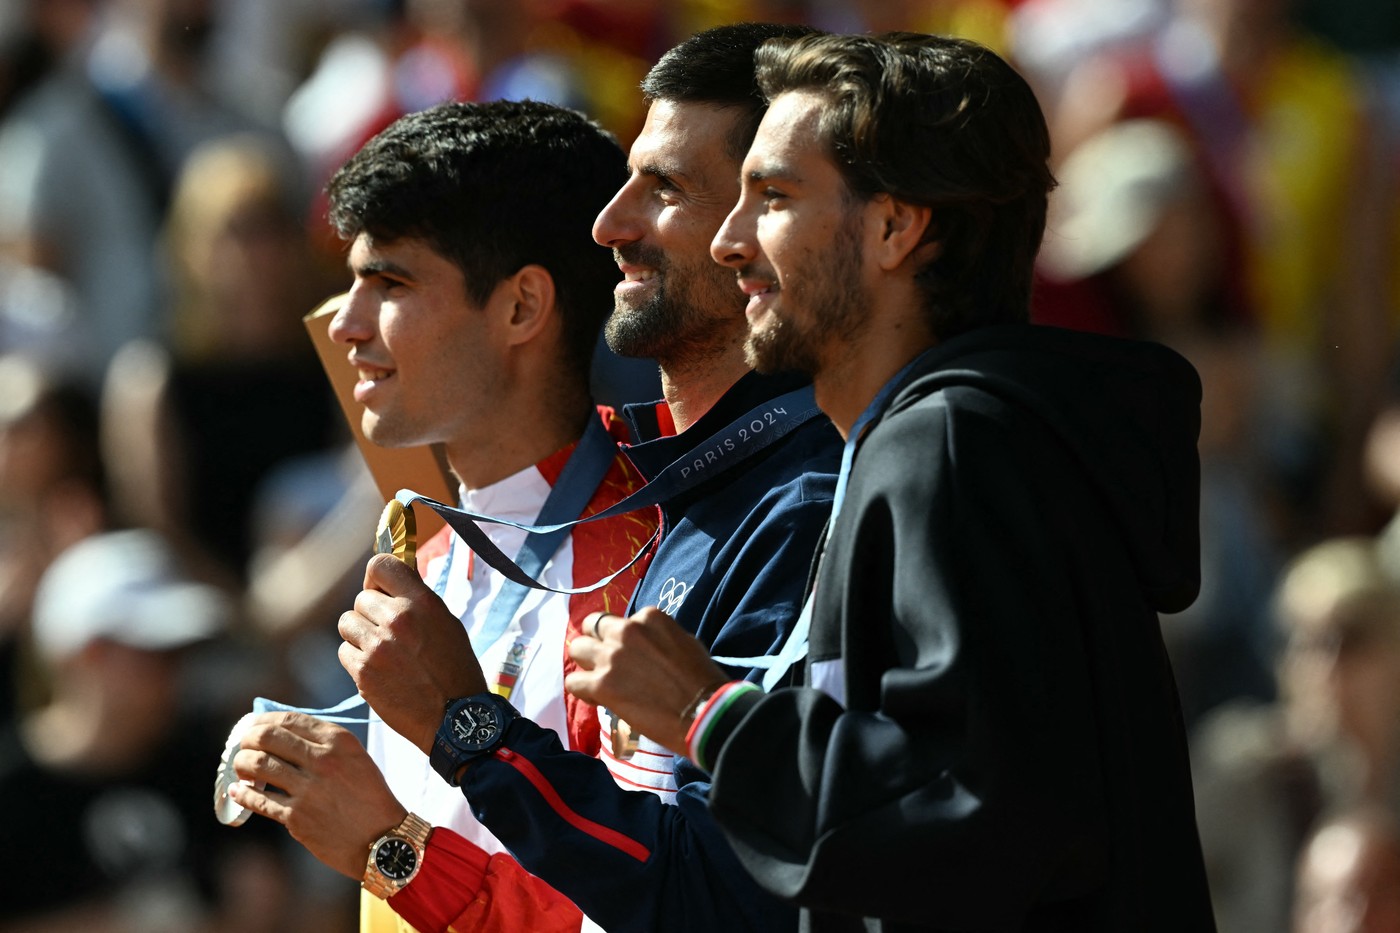 (L-R) Silver medallist Spain's Carlos Alcaraz, gold medallist, Serbia's Novak Djokovic and bronze medallist Italy's Lorenzo Musetti pose with their medals on the podium at the presentation ceremony for the men's singles tennis event on Court Philippe-Chatrier at the Roland-Garros Stadium during the Paris 2024 Olympic Games, in Paris on August 4, 2024.,Image: 895909330, License: Rights-managed, Restrictions: , Model Release: no